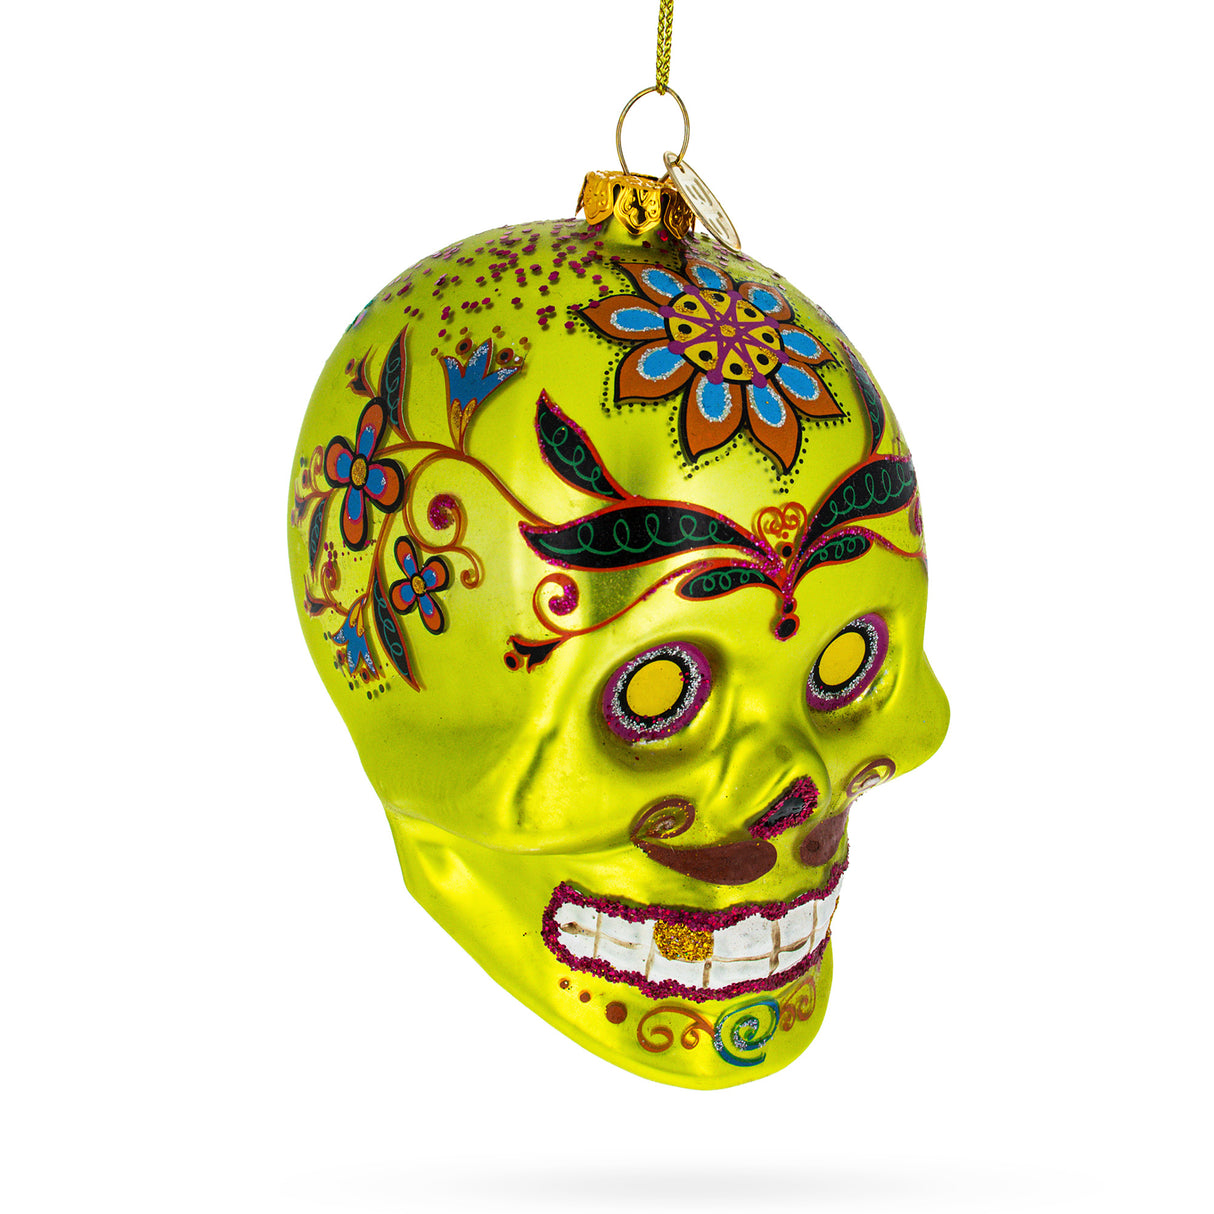 Glass Ornate Decorated Skull - Blown Glass Christmas Ornament in Green color